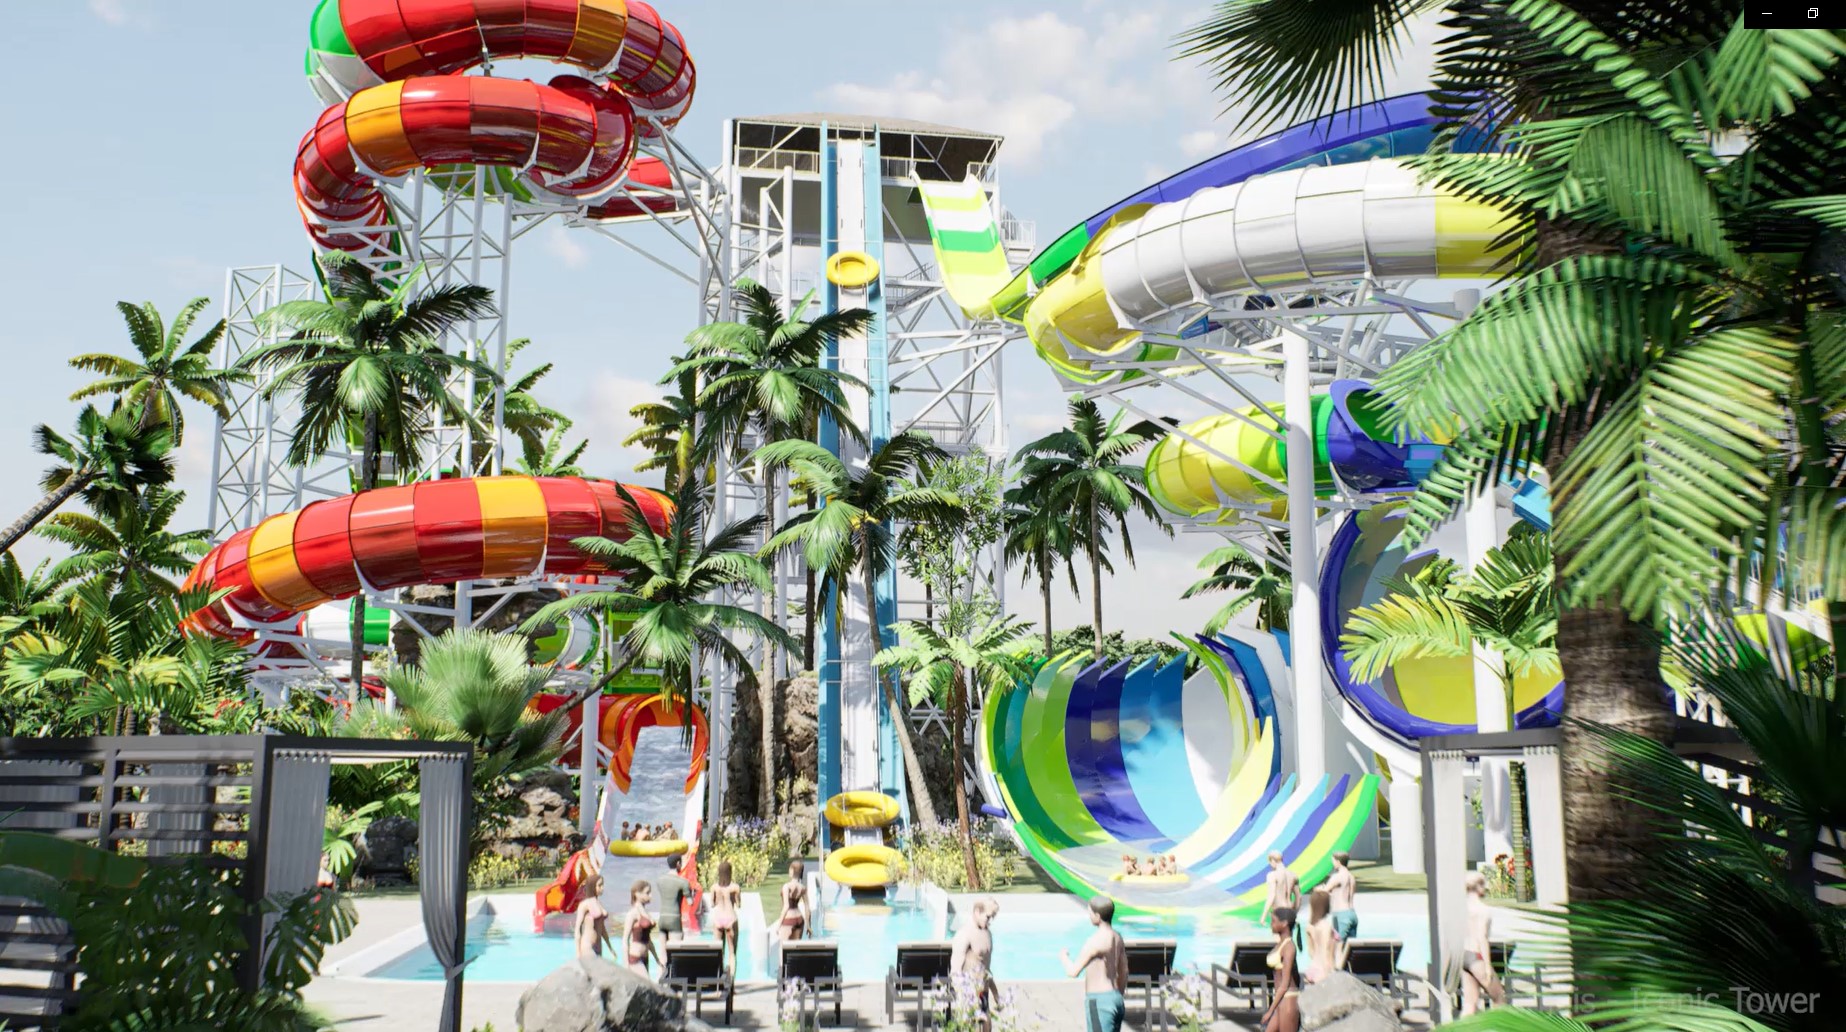 Water slide tower with two 6-person raft rides